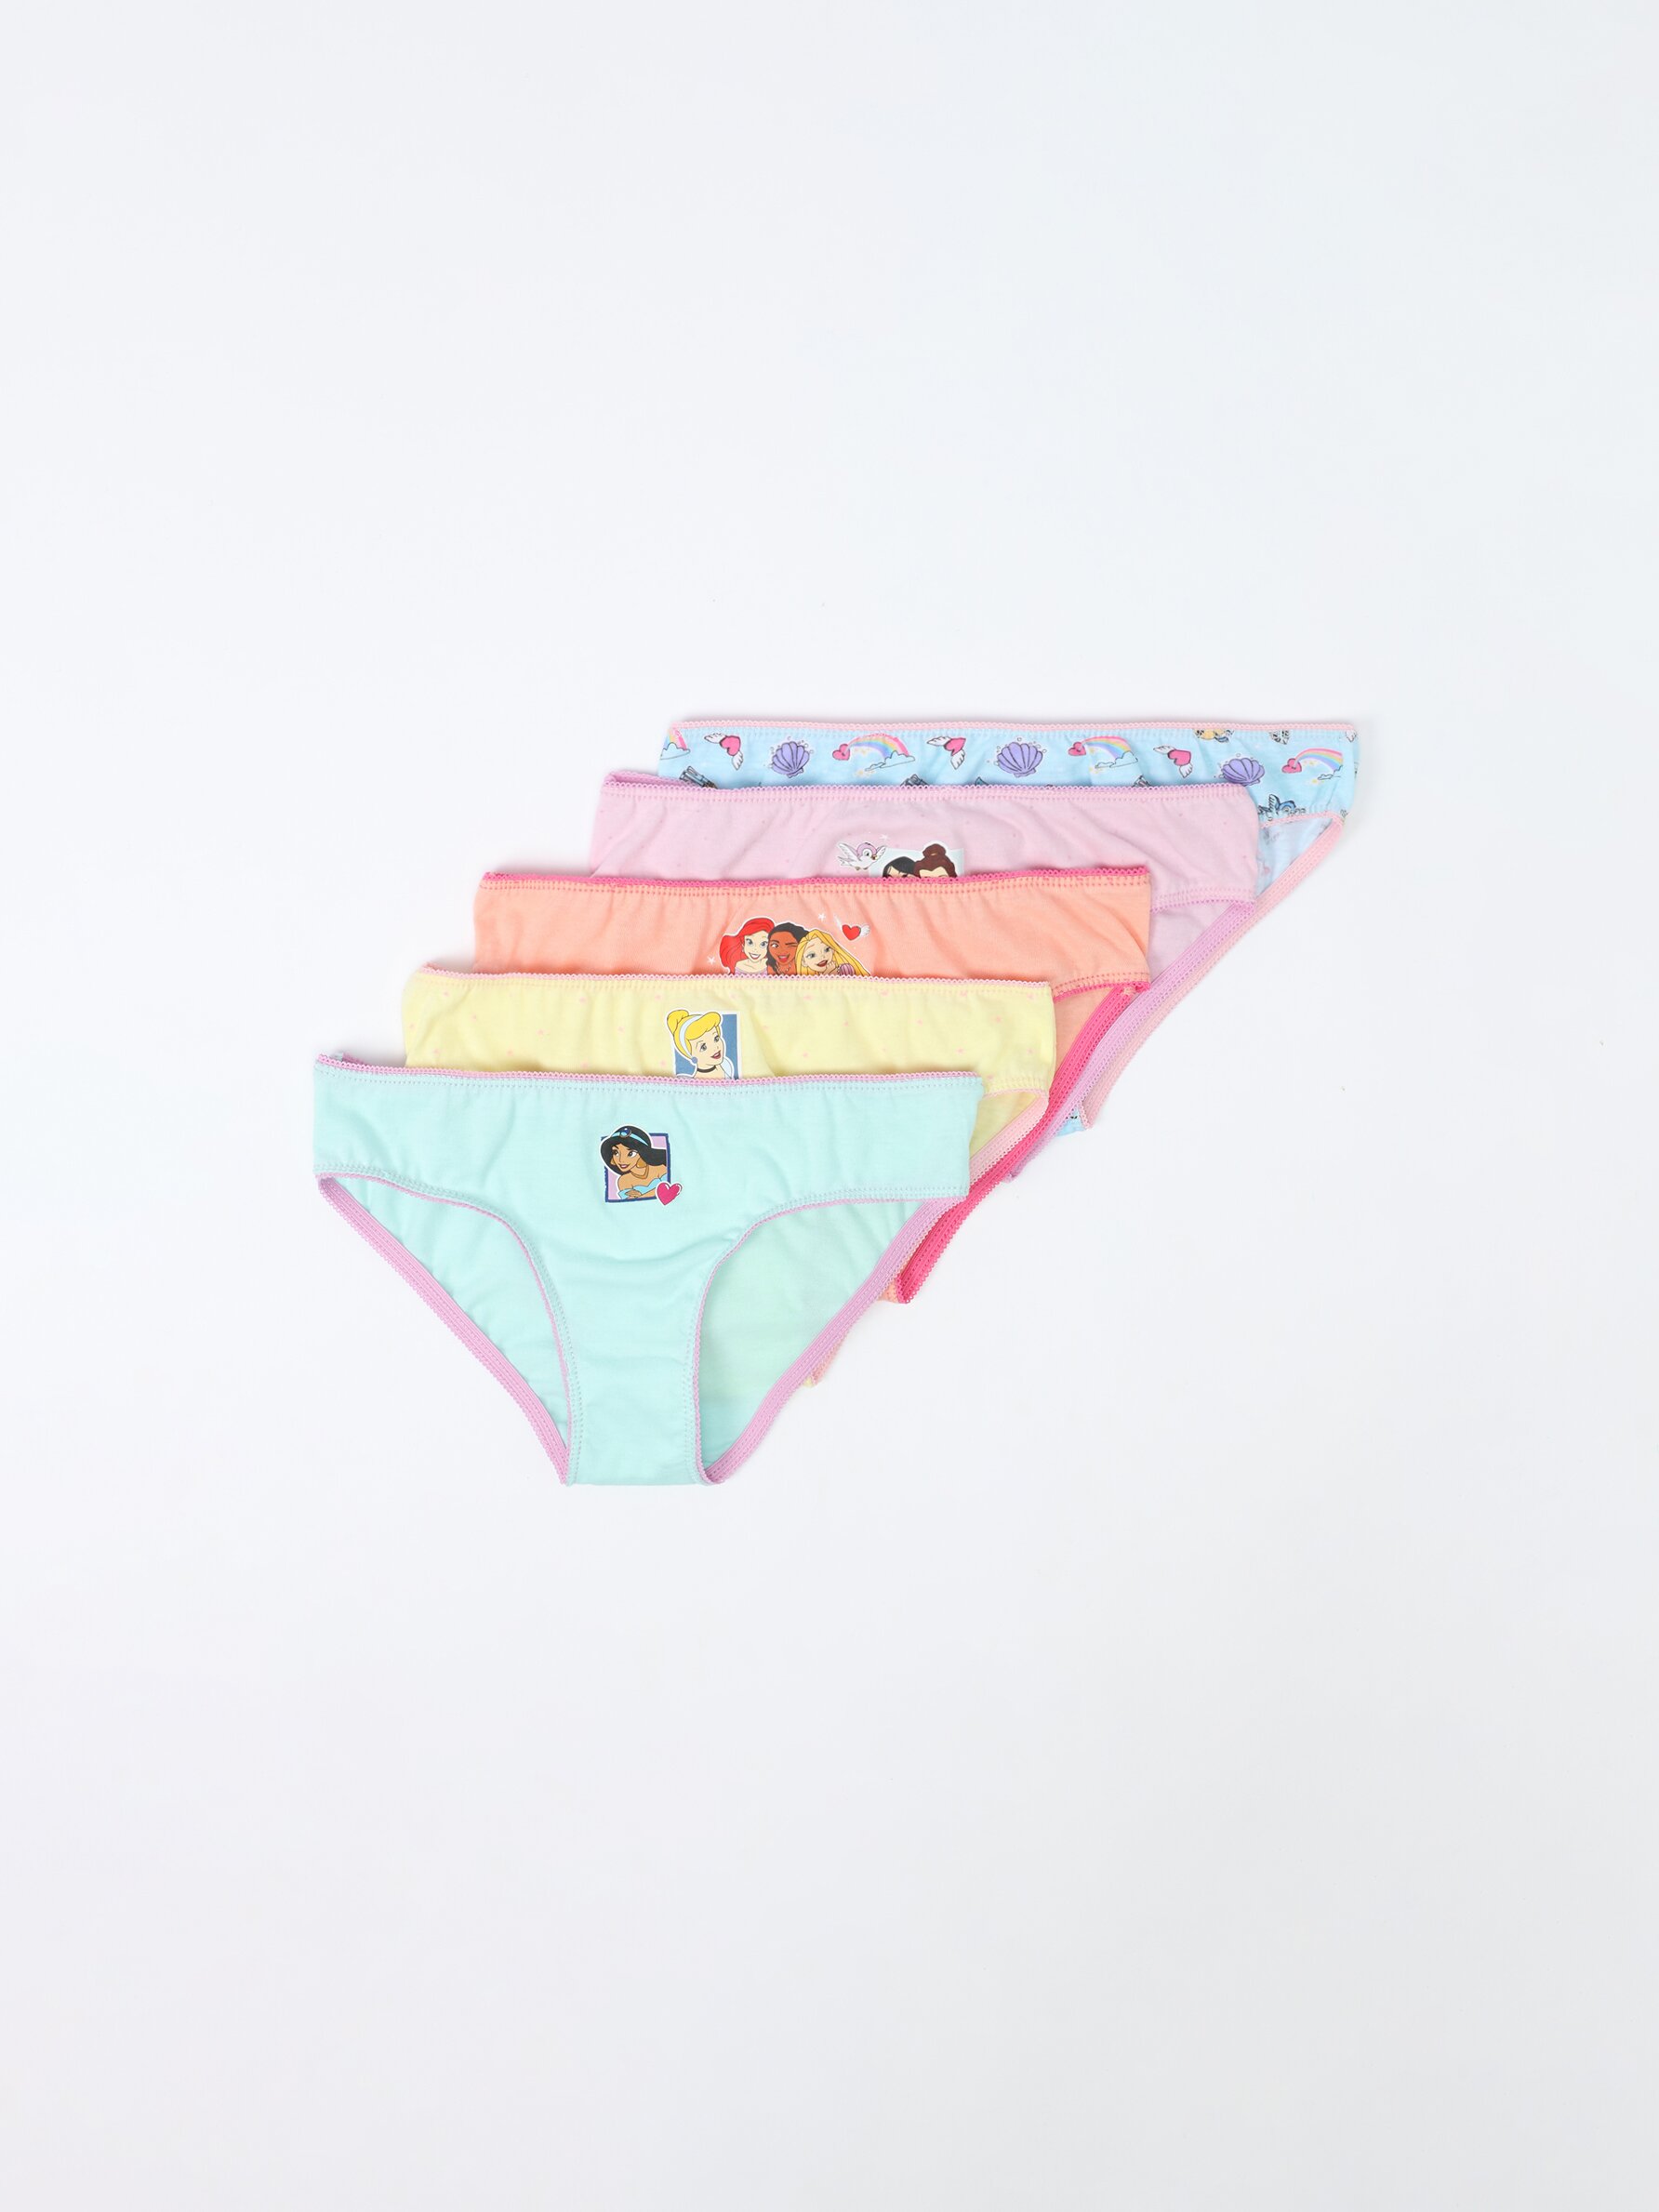 5-pack of ©Disney Princesses briefs - Collabs - ACCESSORIES - Girl